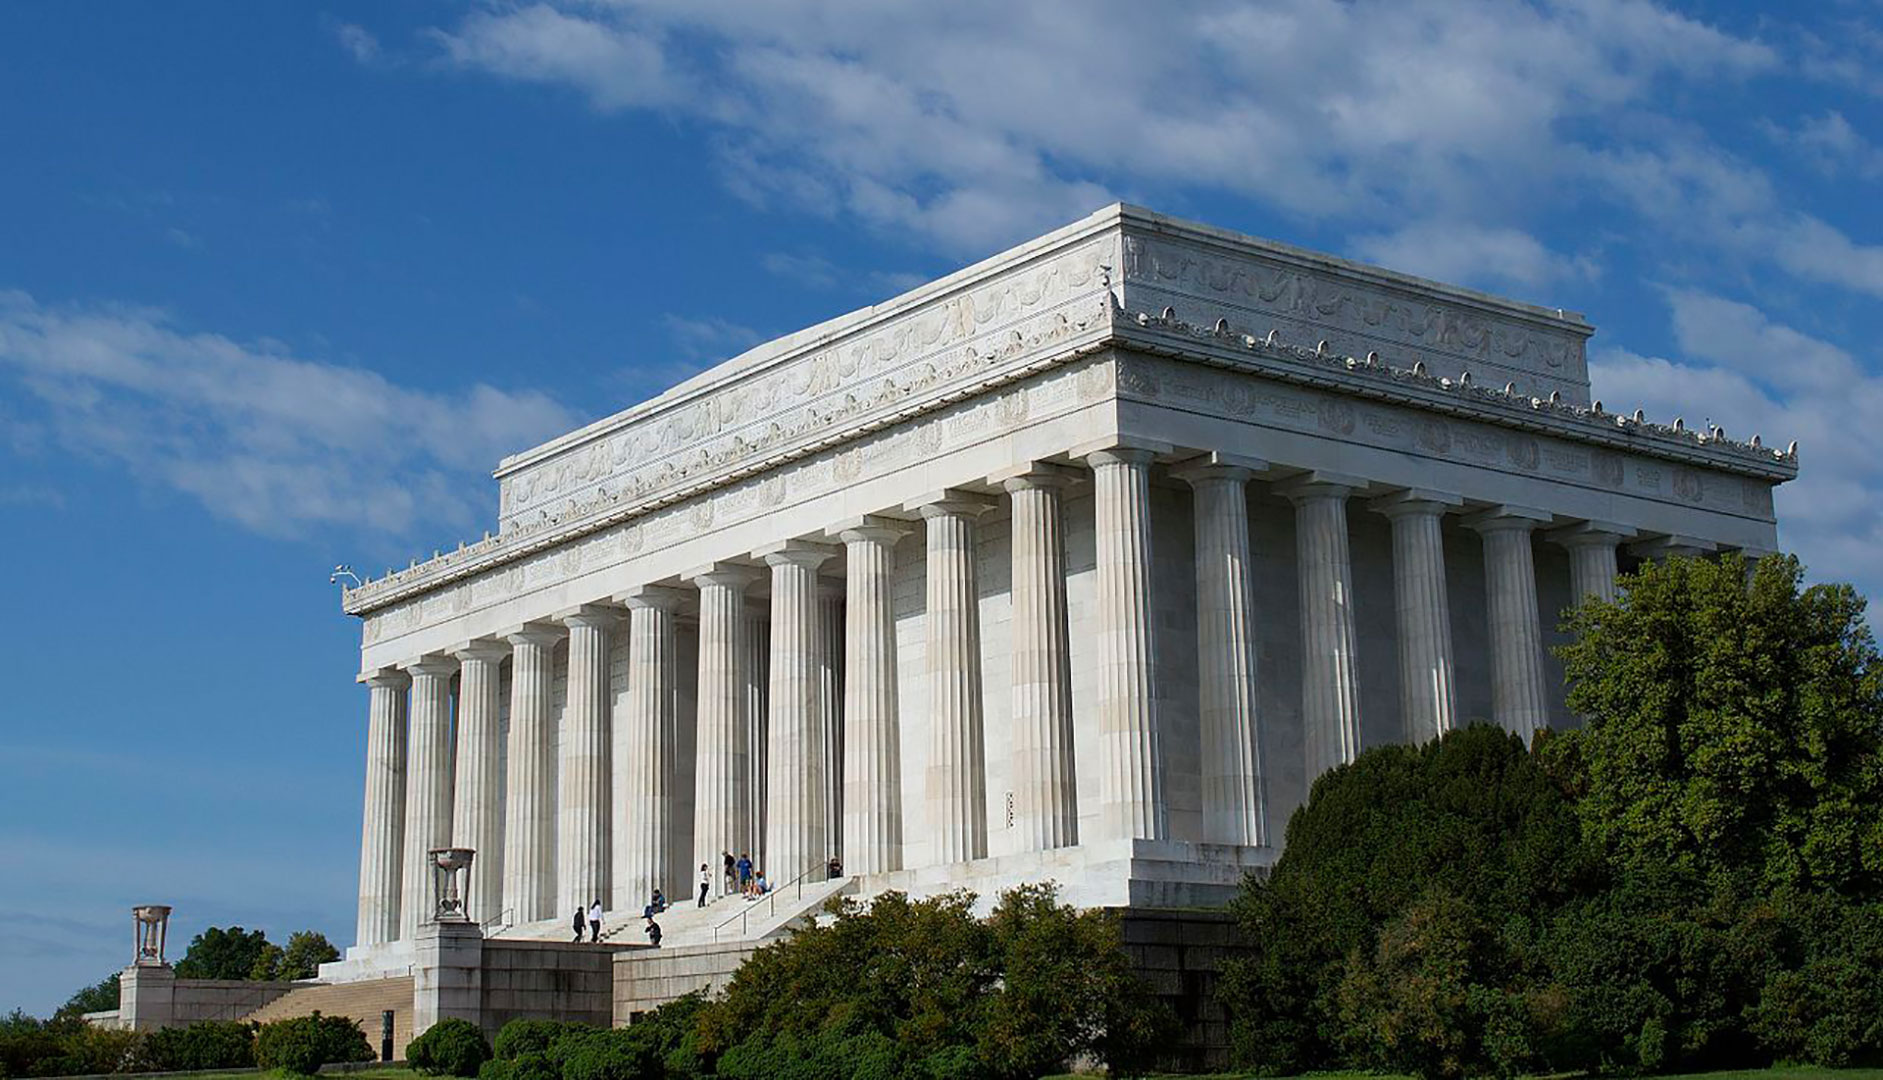 Daytime view of an enormous, temple-like marble structure lined with white columns.